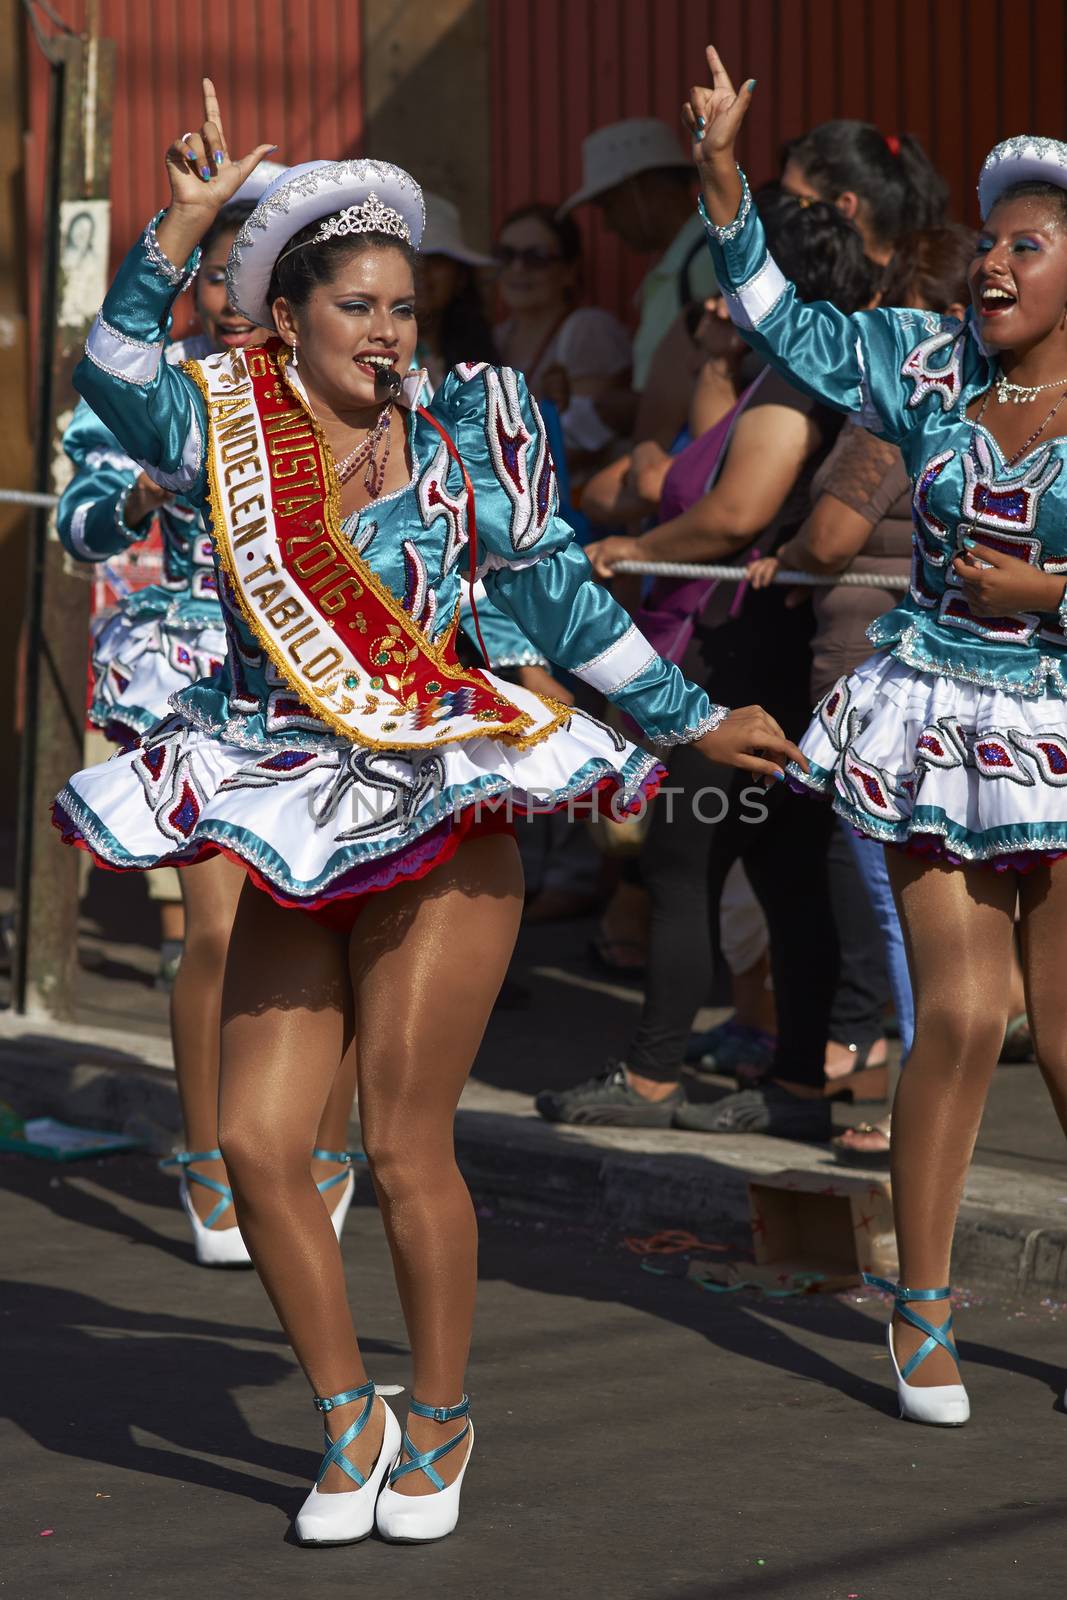 Caporales dance group performing at the annual Carnaval Andino con la Fuerza del Sol in Arica, Chile.